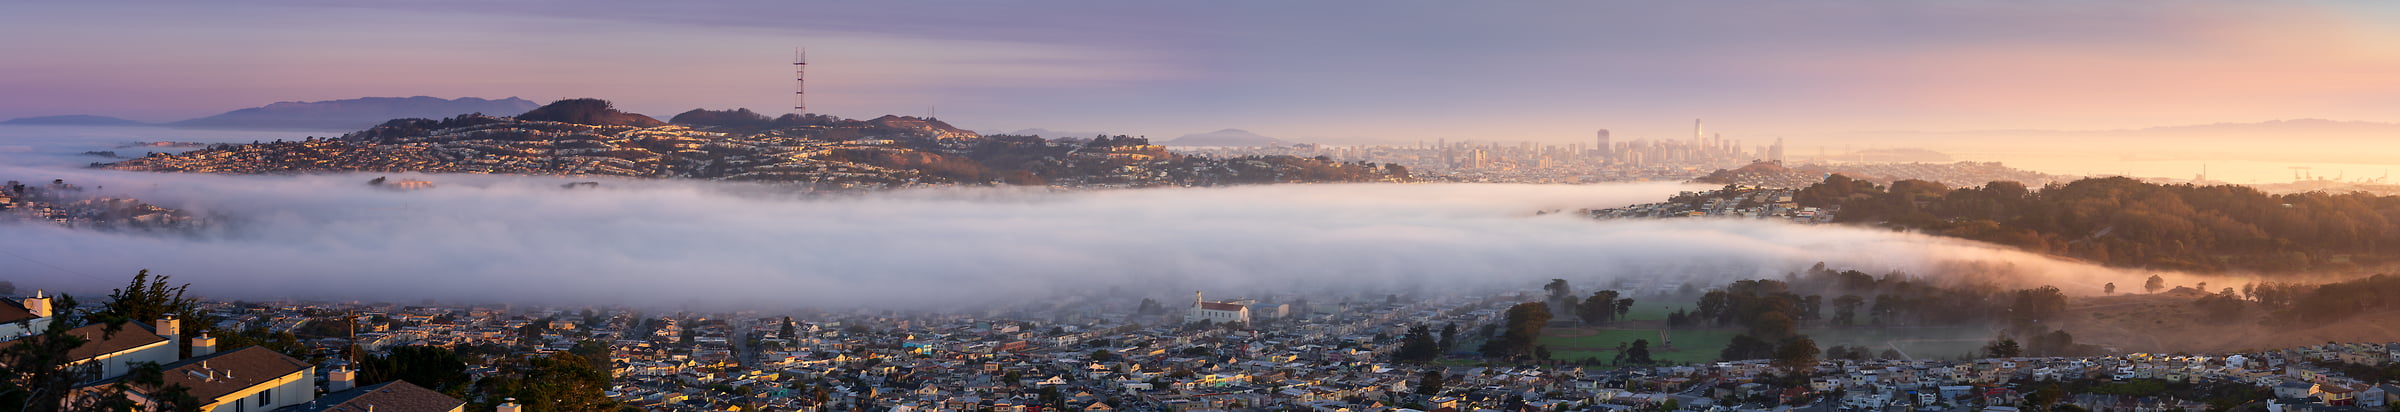 365 megapixels! A very high resolution panorama photo of the San Francisco skyline with fog at sunrise; cityscape photograph created by Jeff Lewis in San Francisco, California.